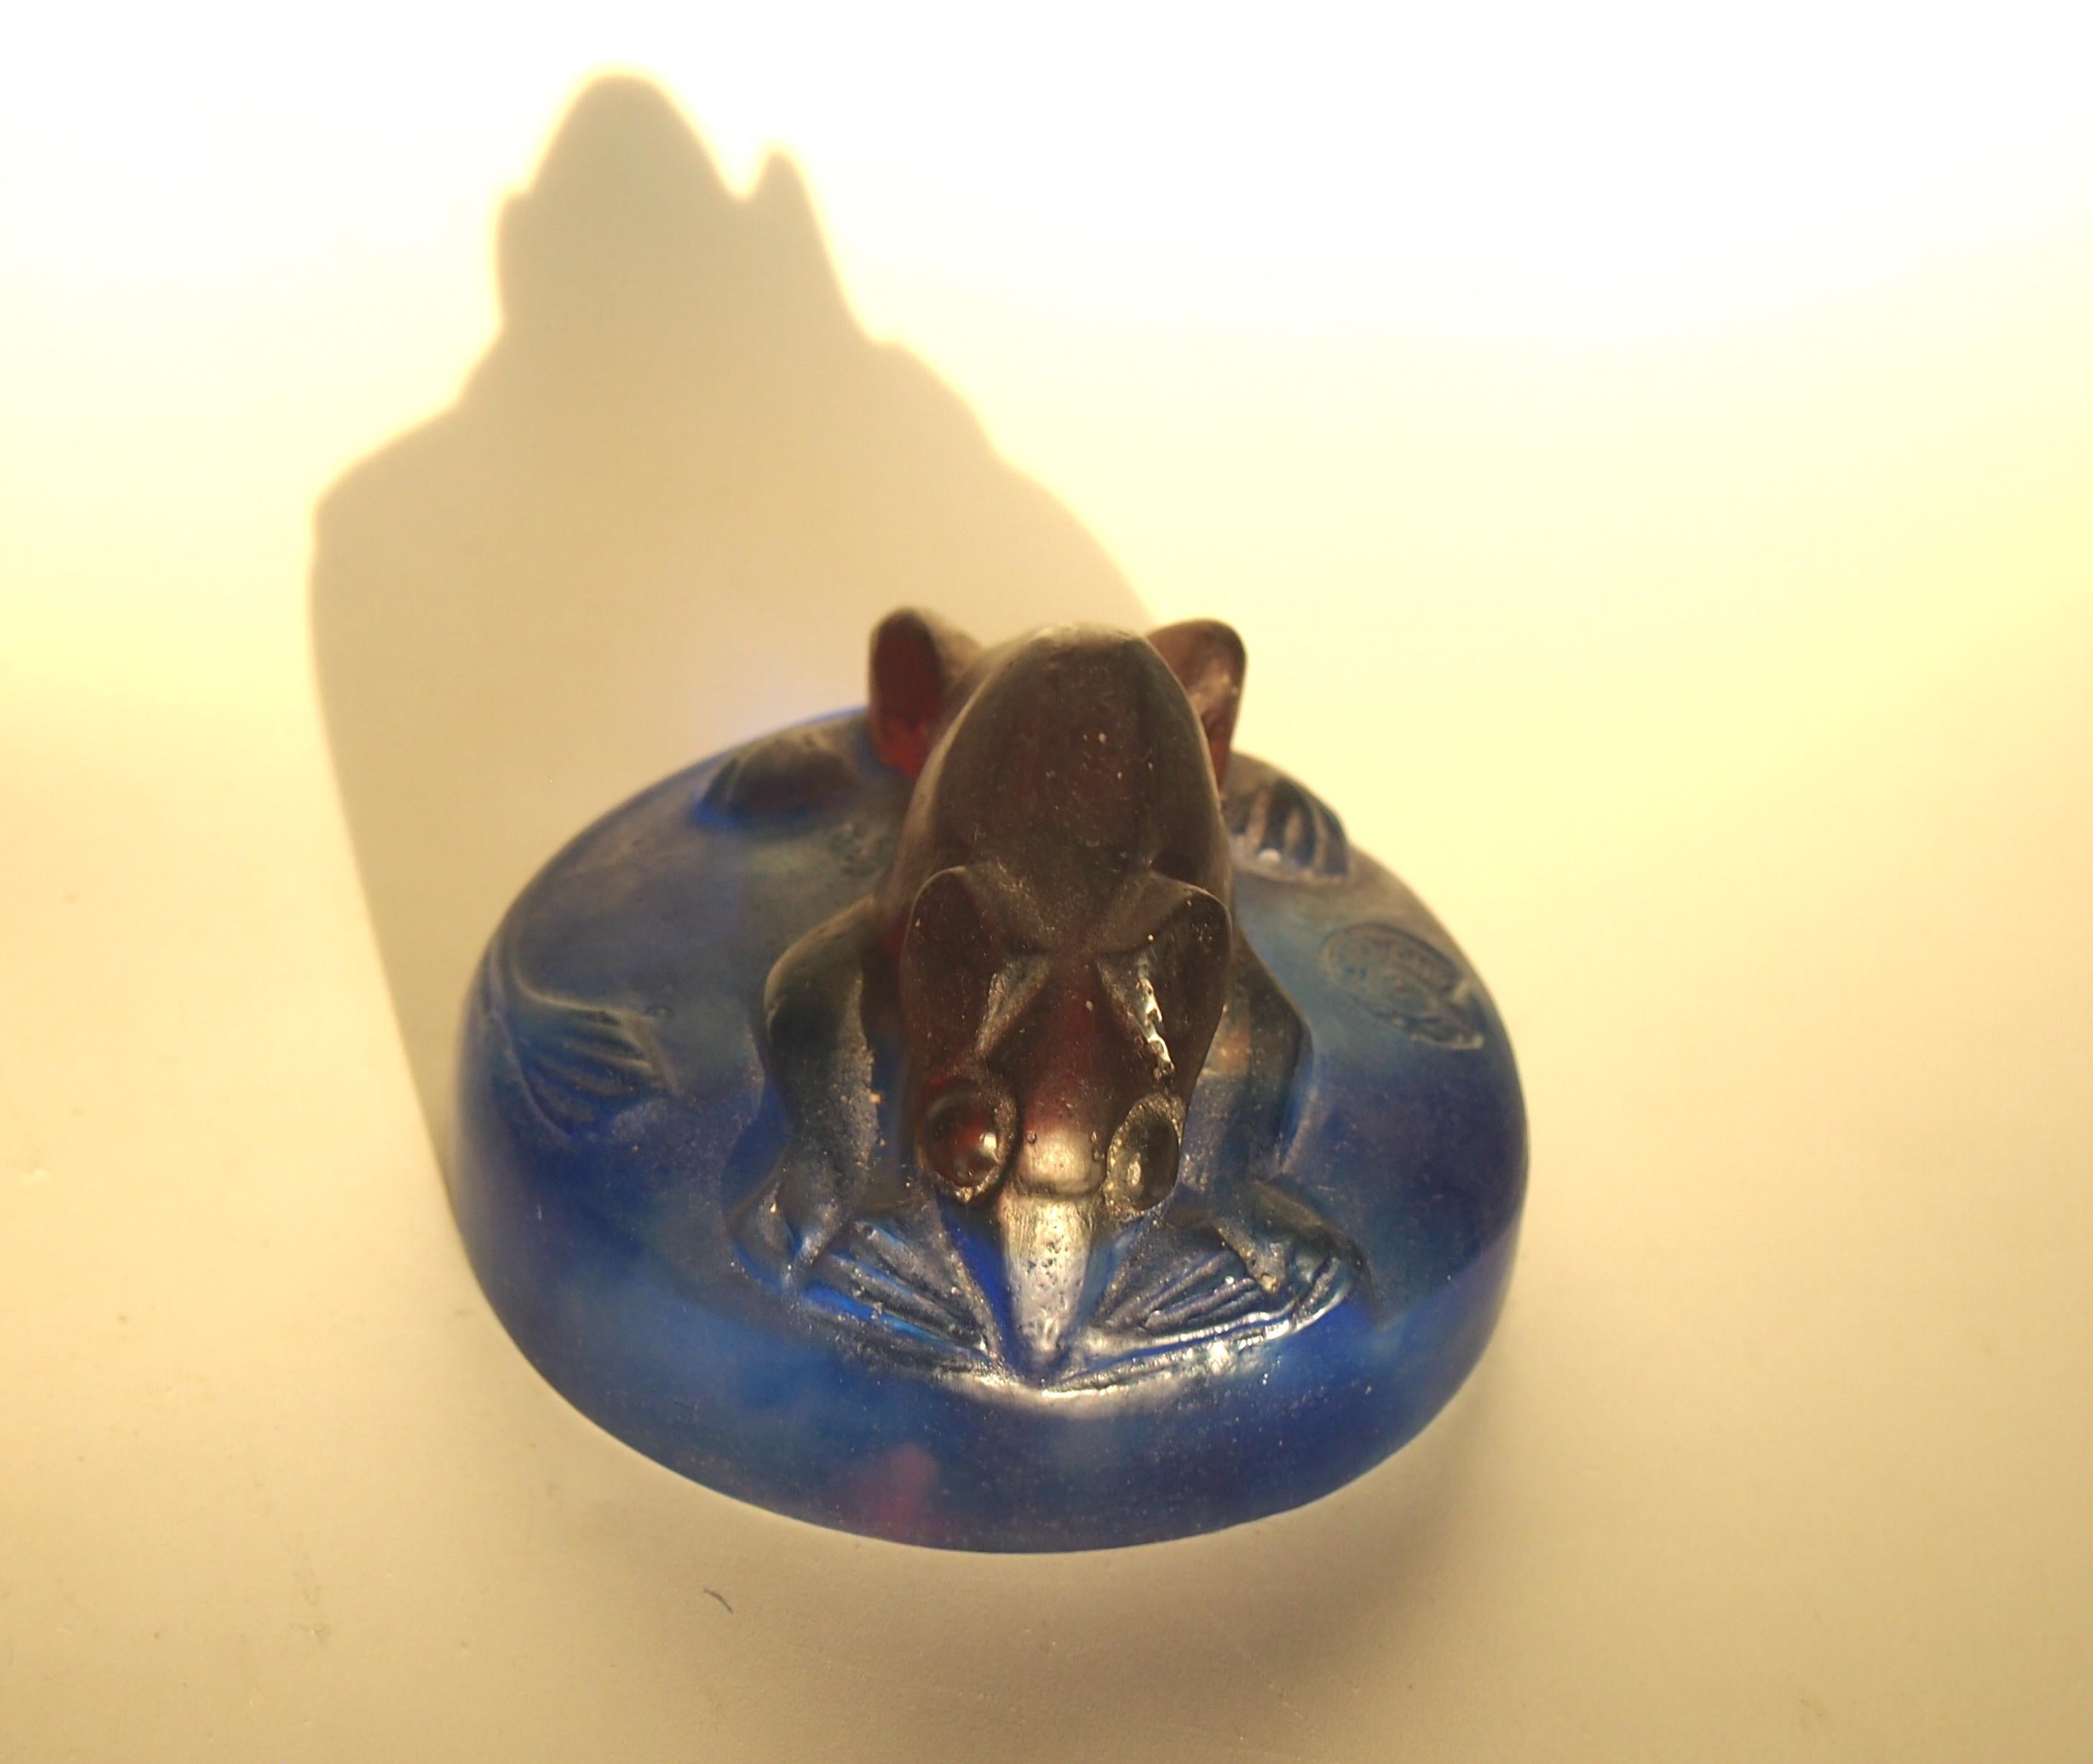 A Francois-Emile Decorchement (1880-1970) late Art Deco Pâtes de Crystal 'Loir' Paperweight. Designed 1952, Moulded as a dormouse, in browns and blues signed with a moulded 'Decorchement' in a circular Cartouche see image 3. This was one of his last